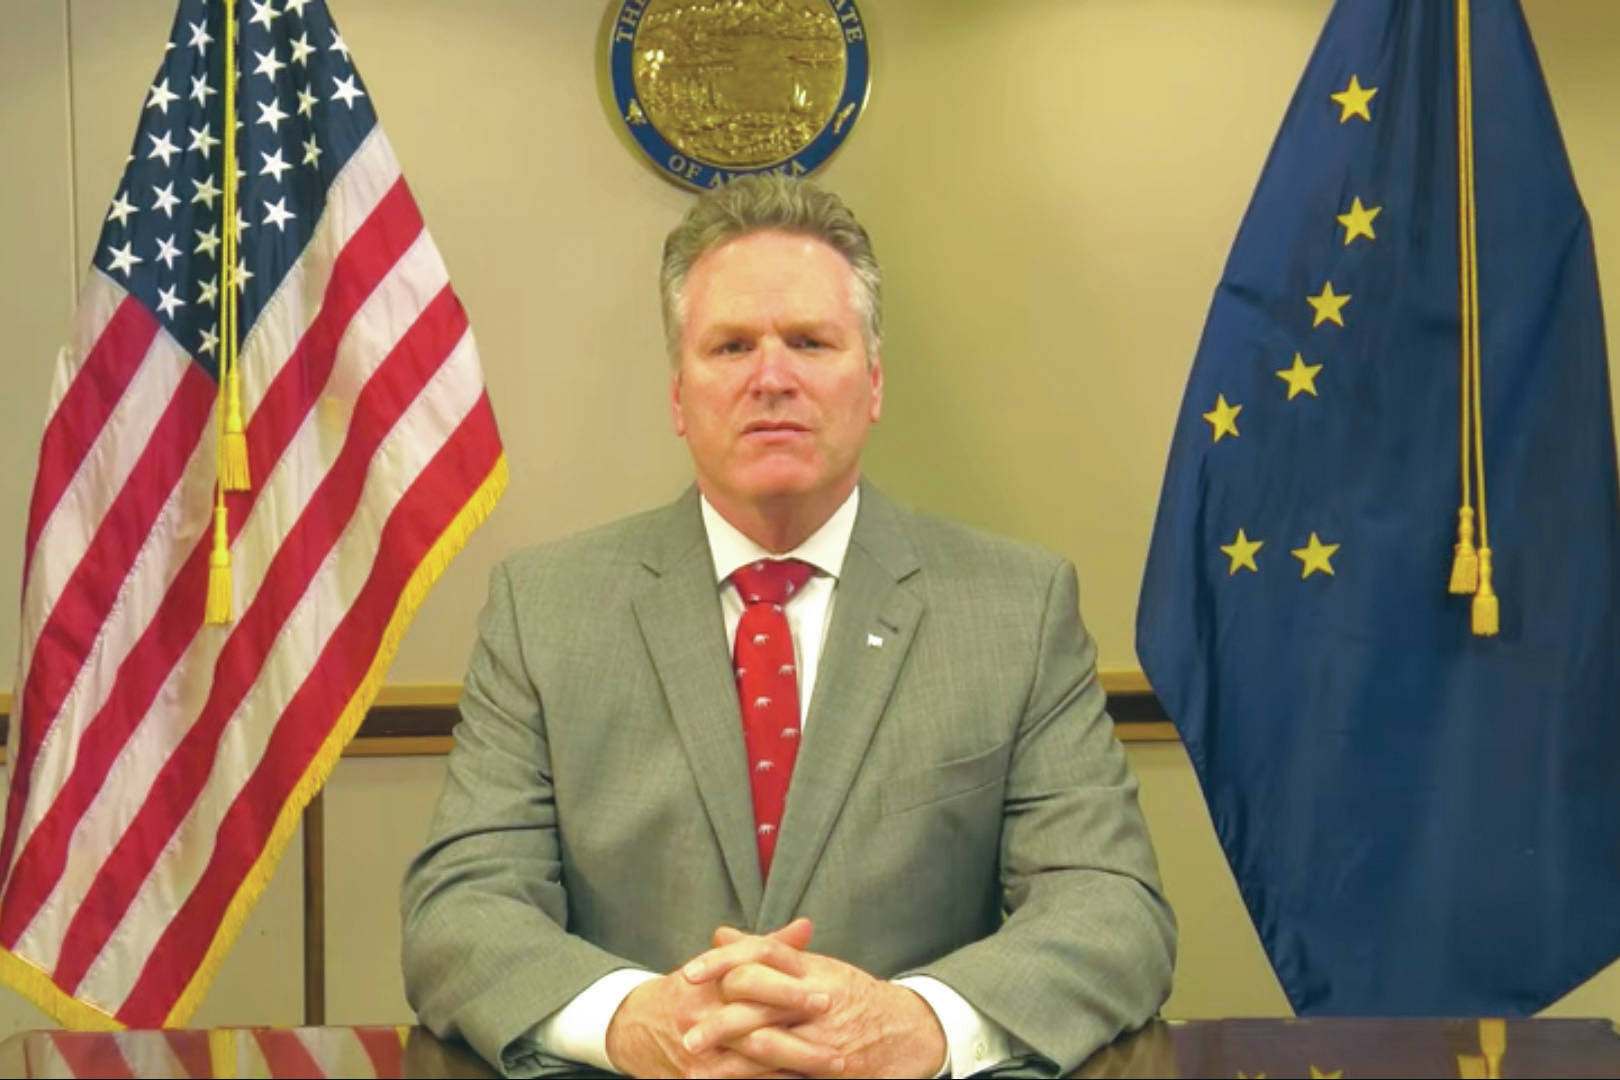 Alaska Governor Mike Dunleavy addresses the state remotely in response to growing COVID-19 case numbers on Thursday, Nov. 12 from Alaska. (Screenshot)